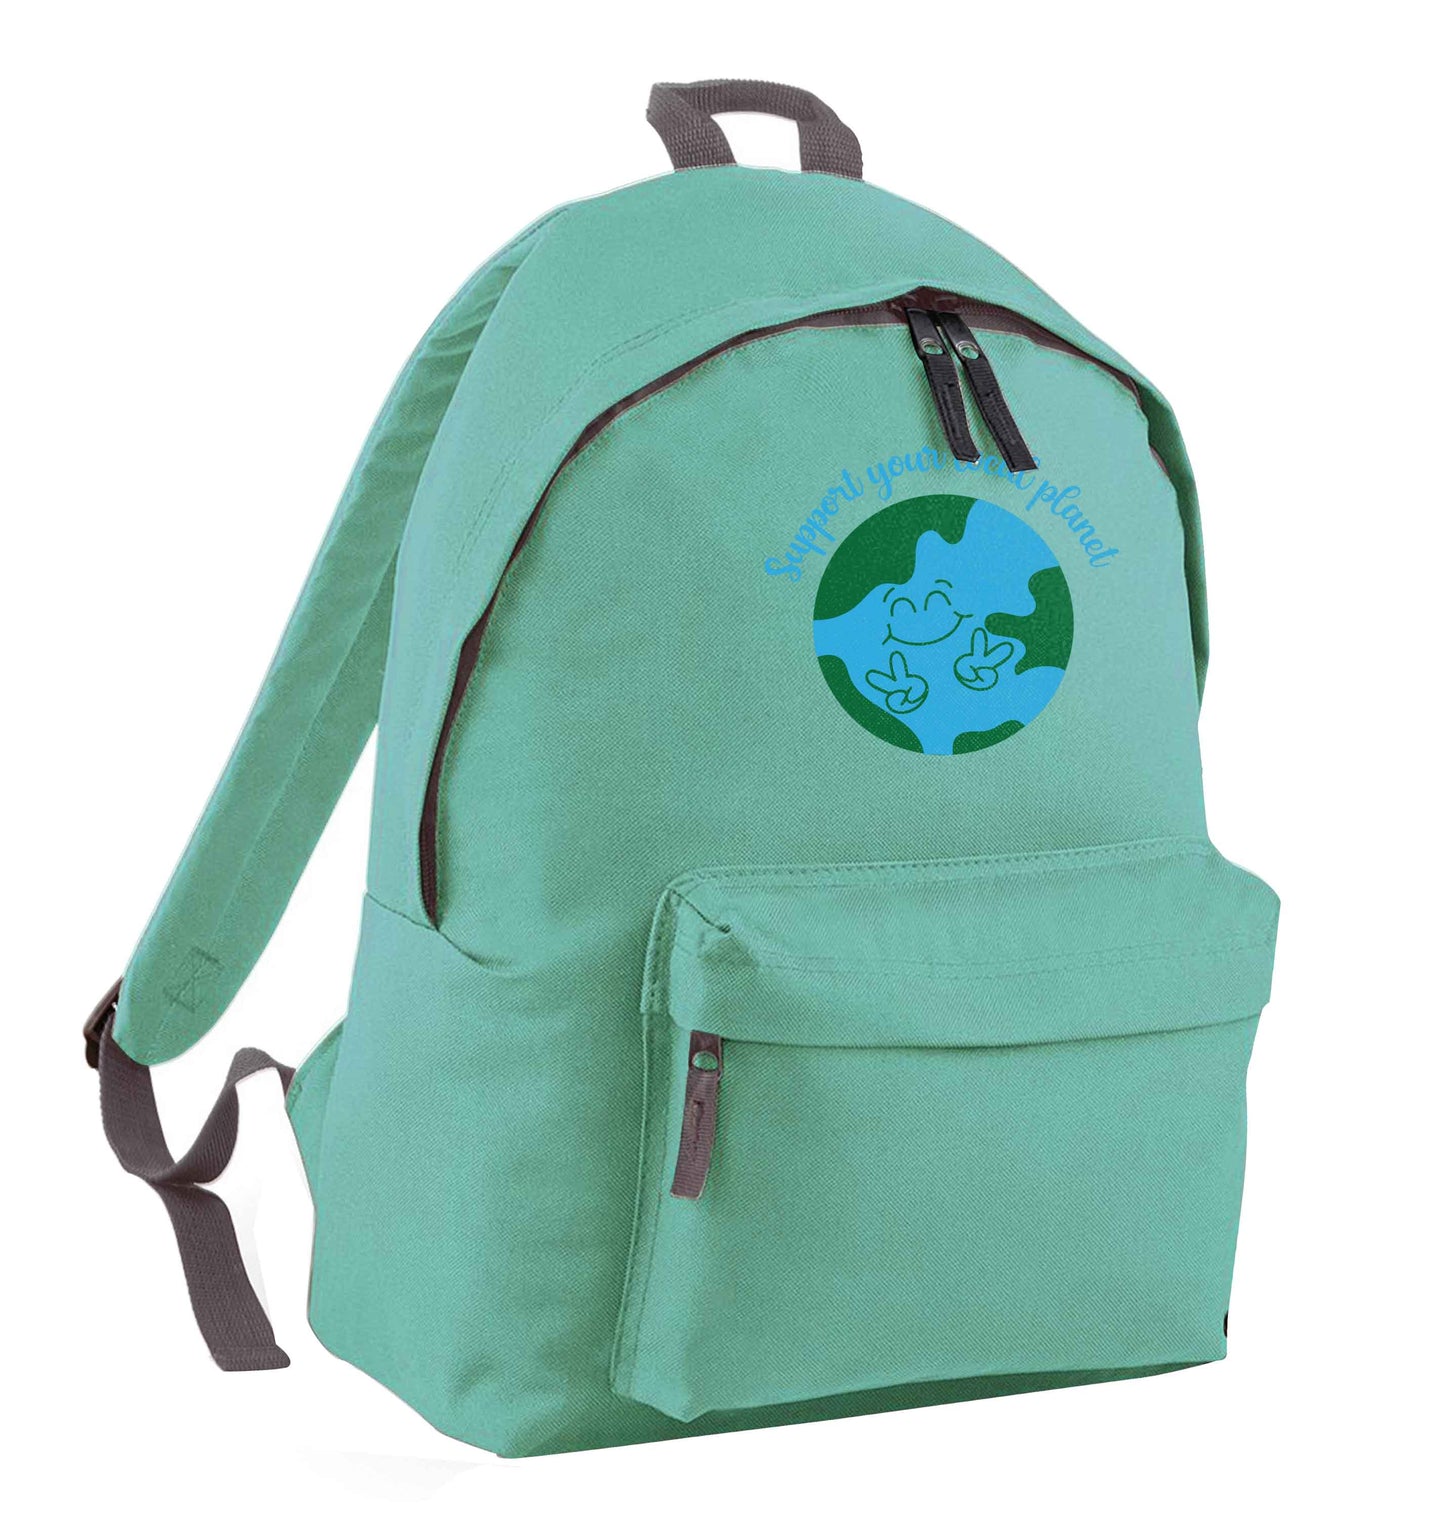 Support your local planet mint adults backpack